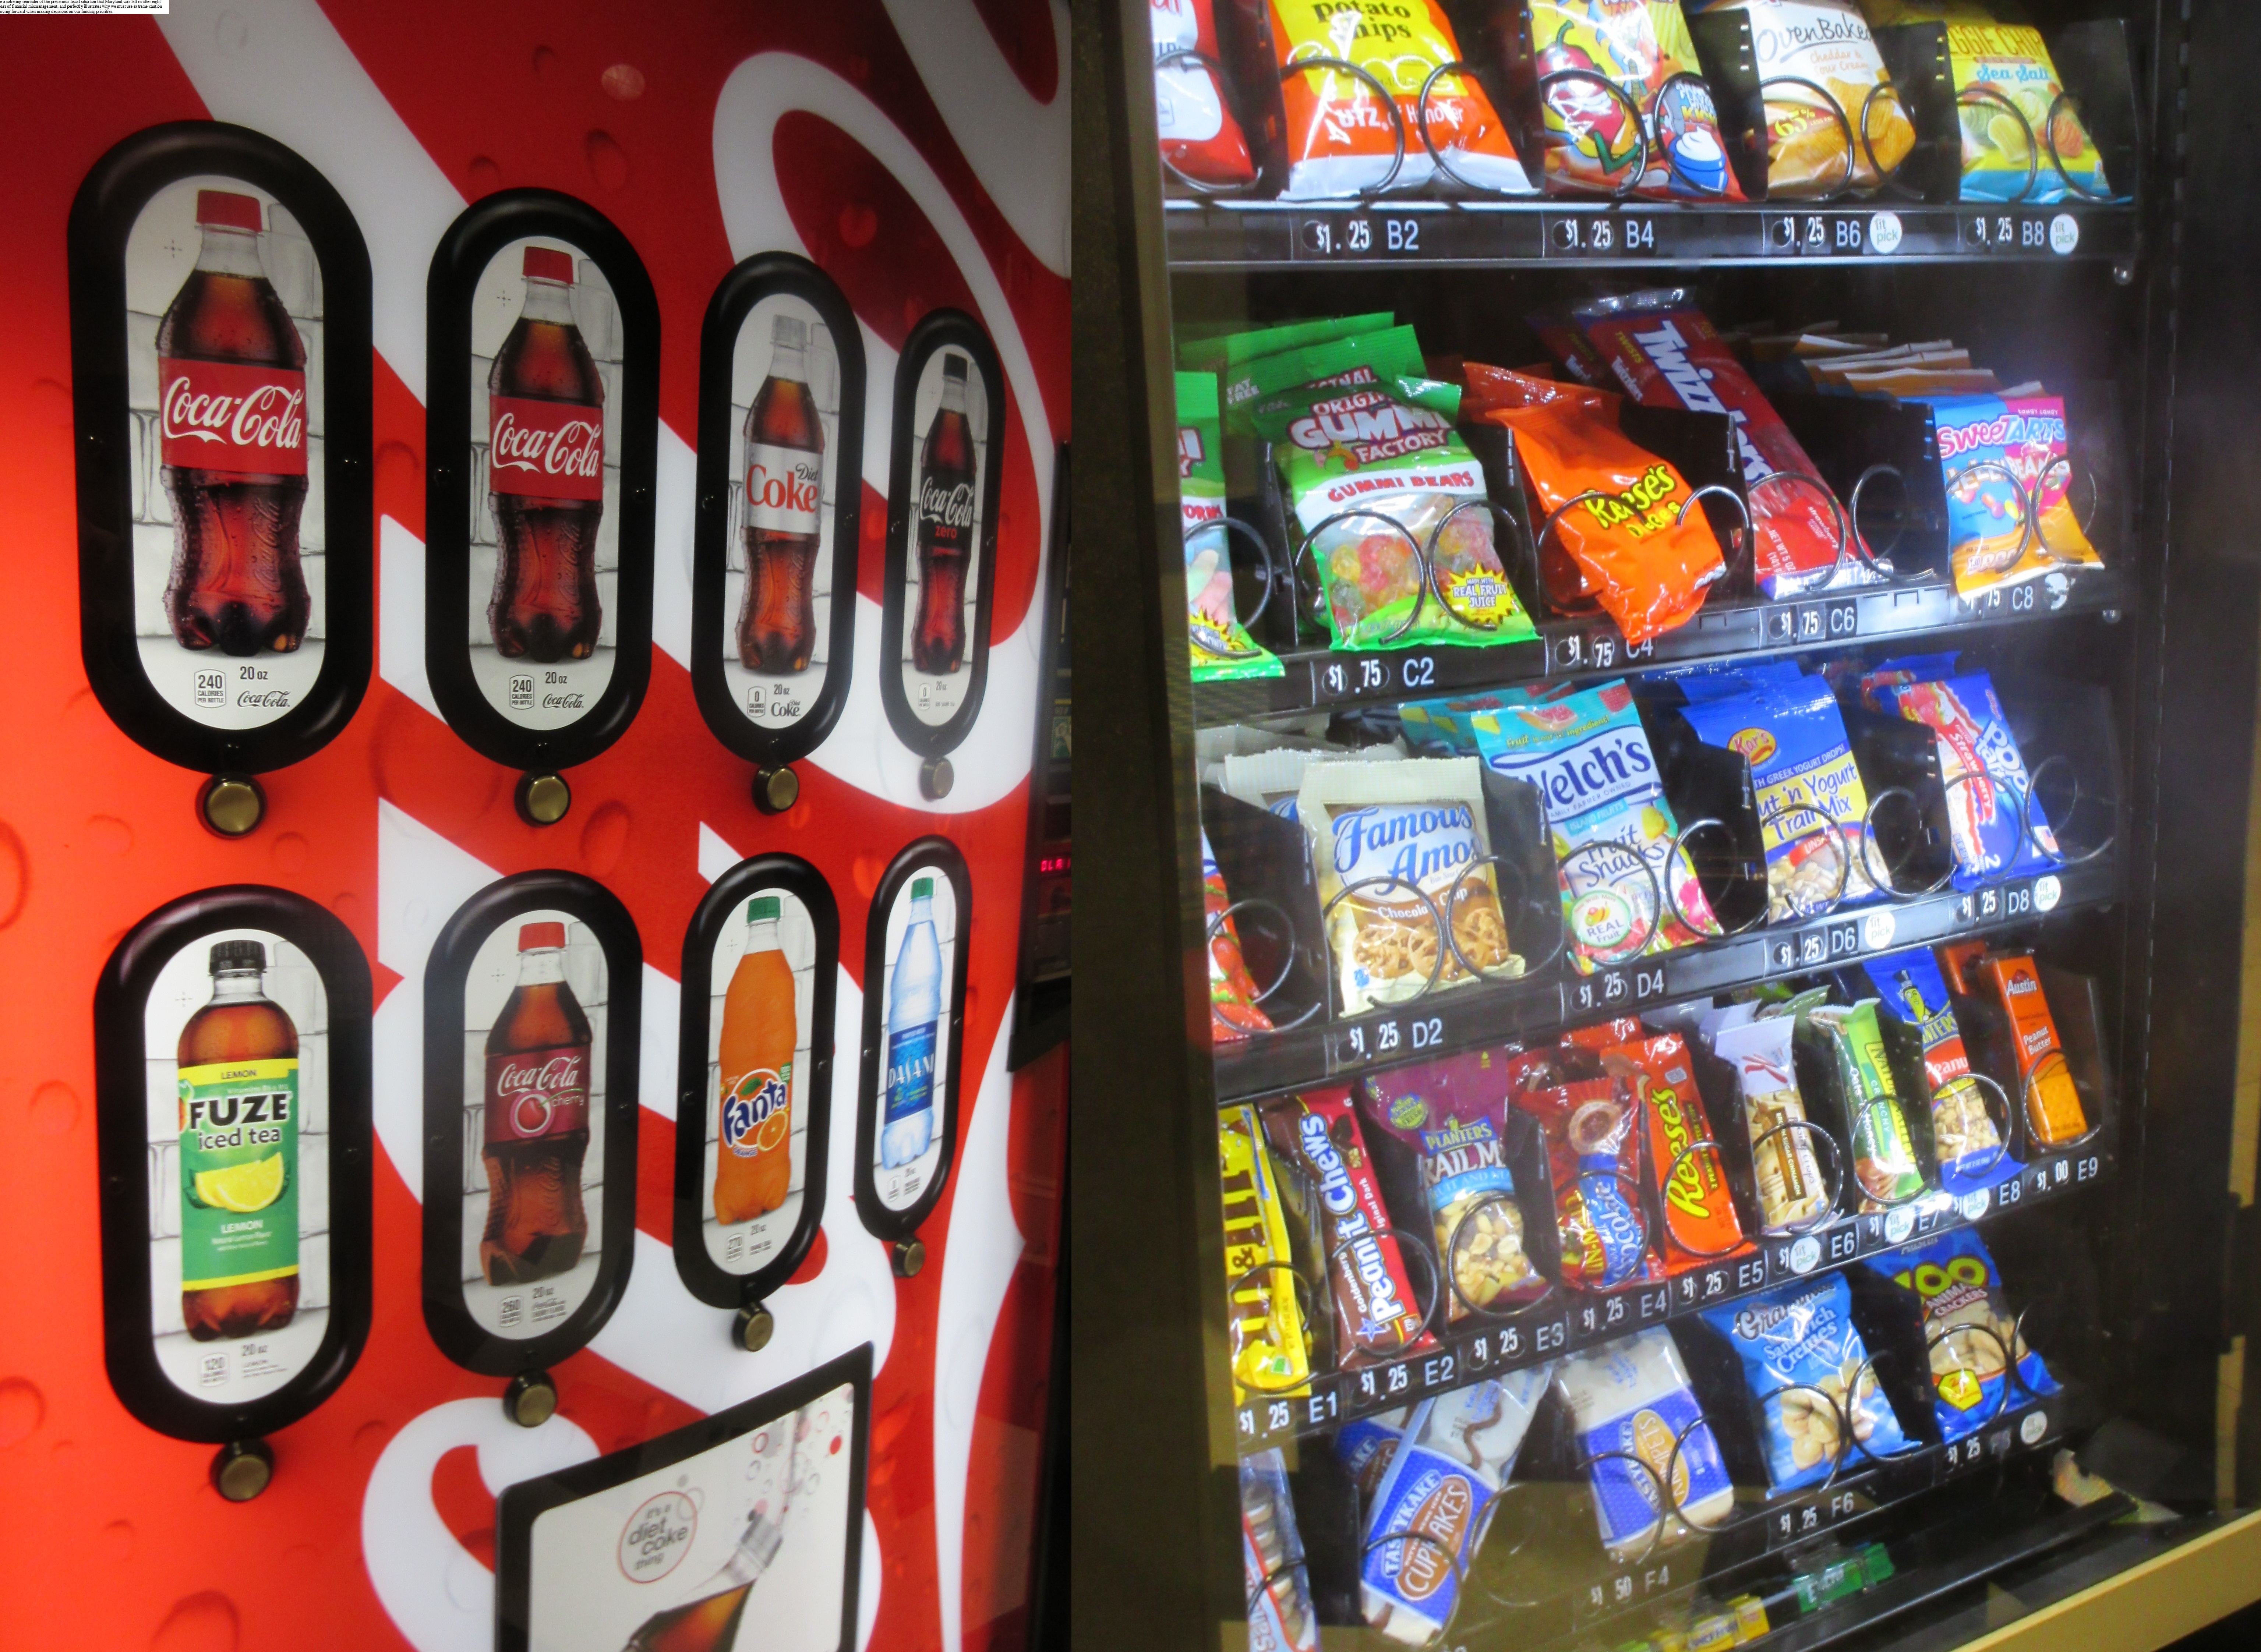 Bill requires healthier choices in vending machines on state property